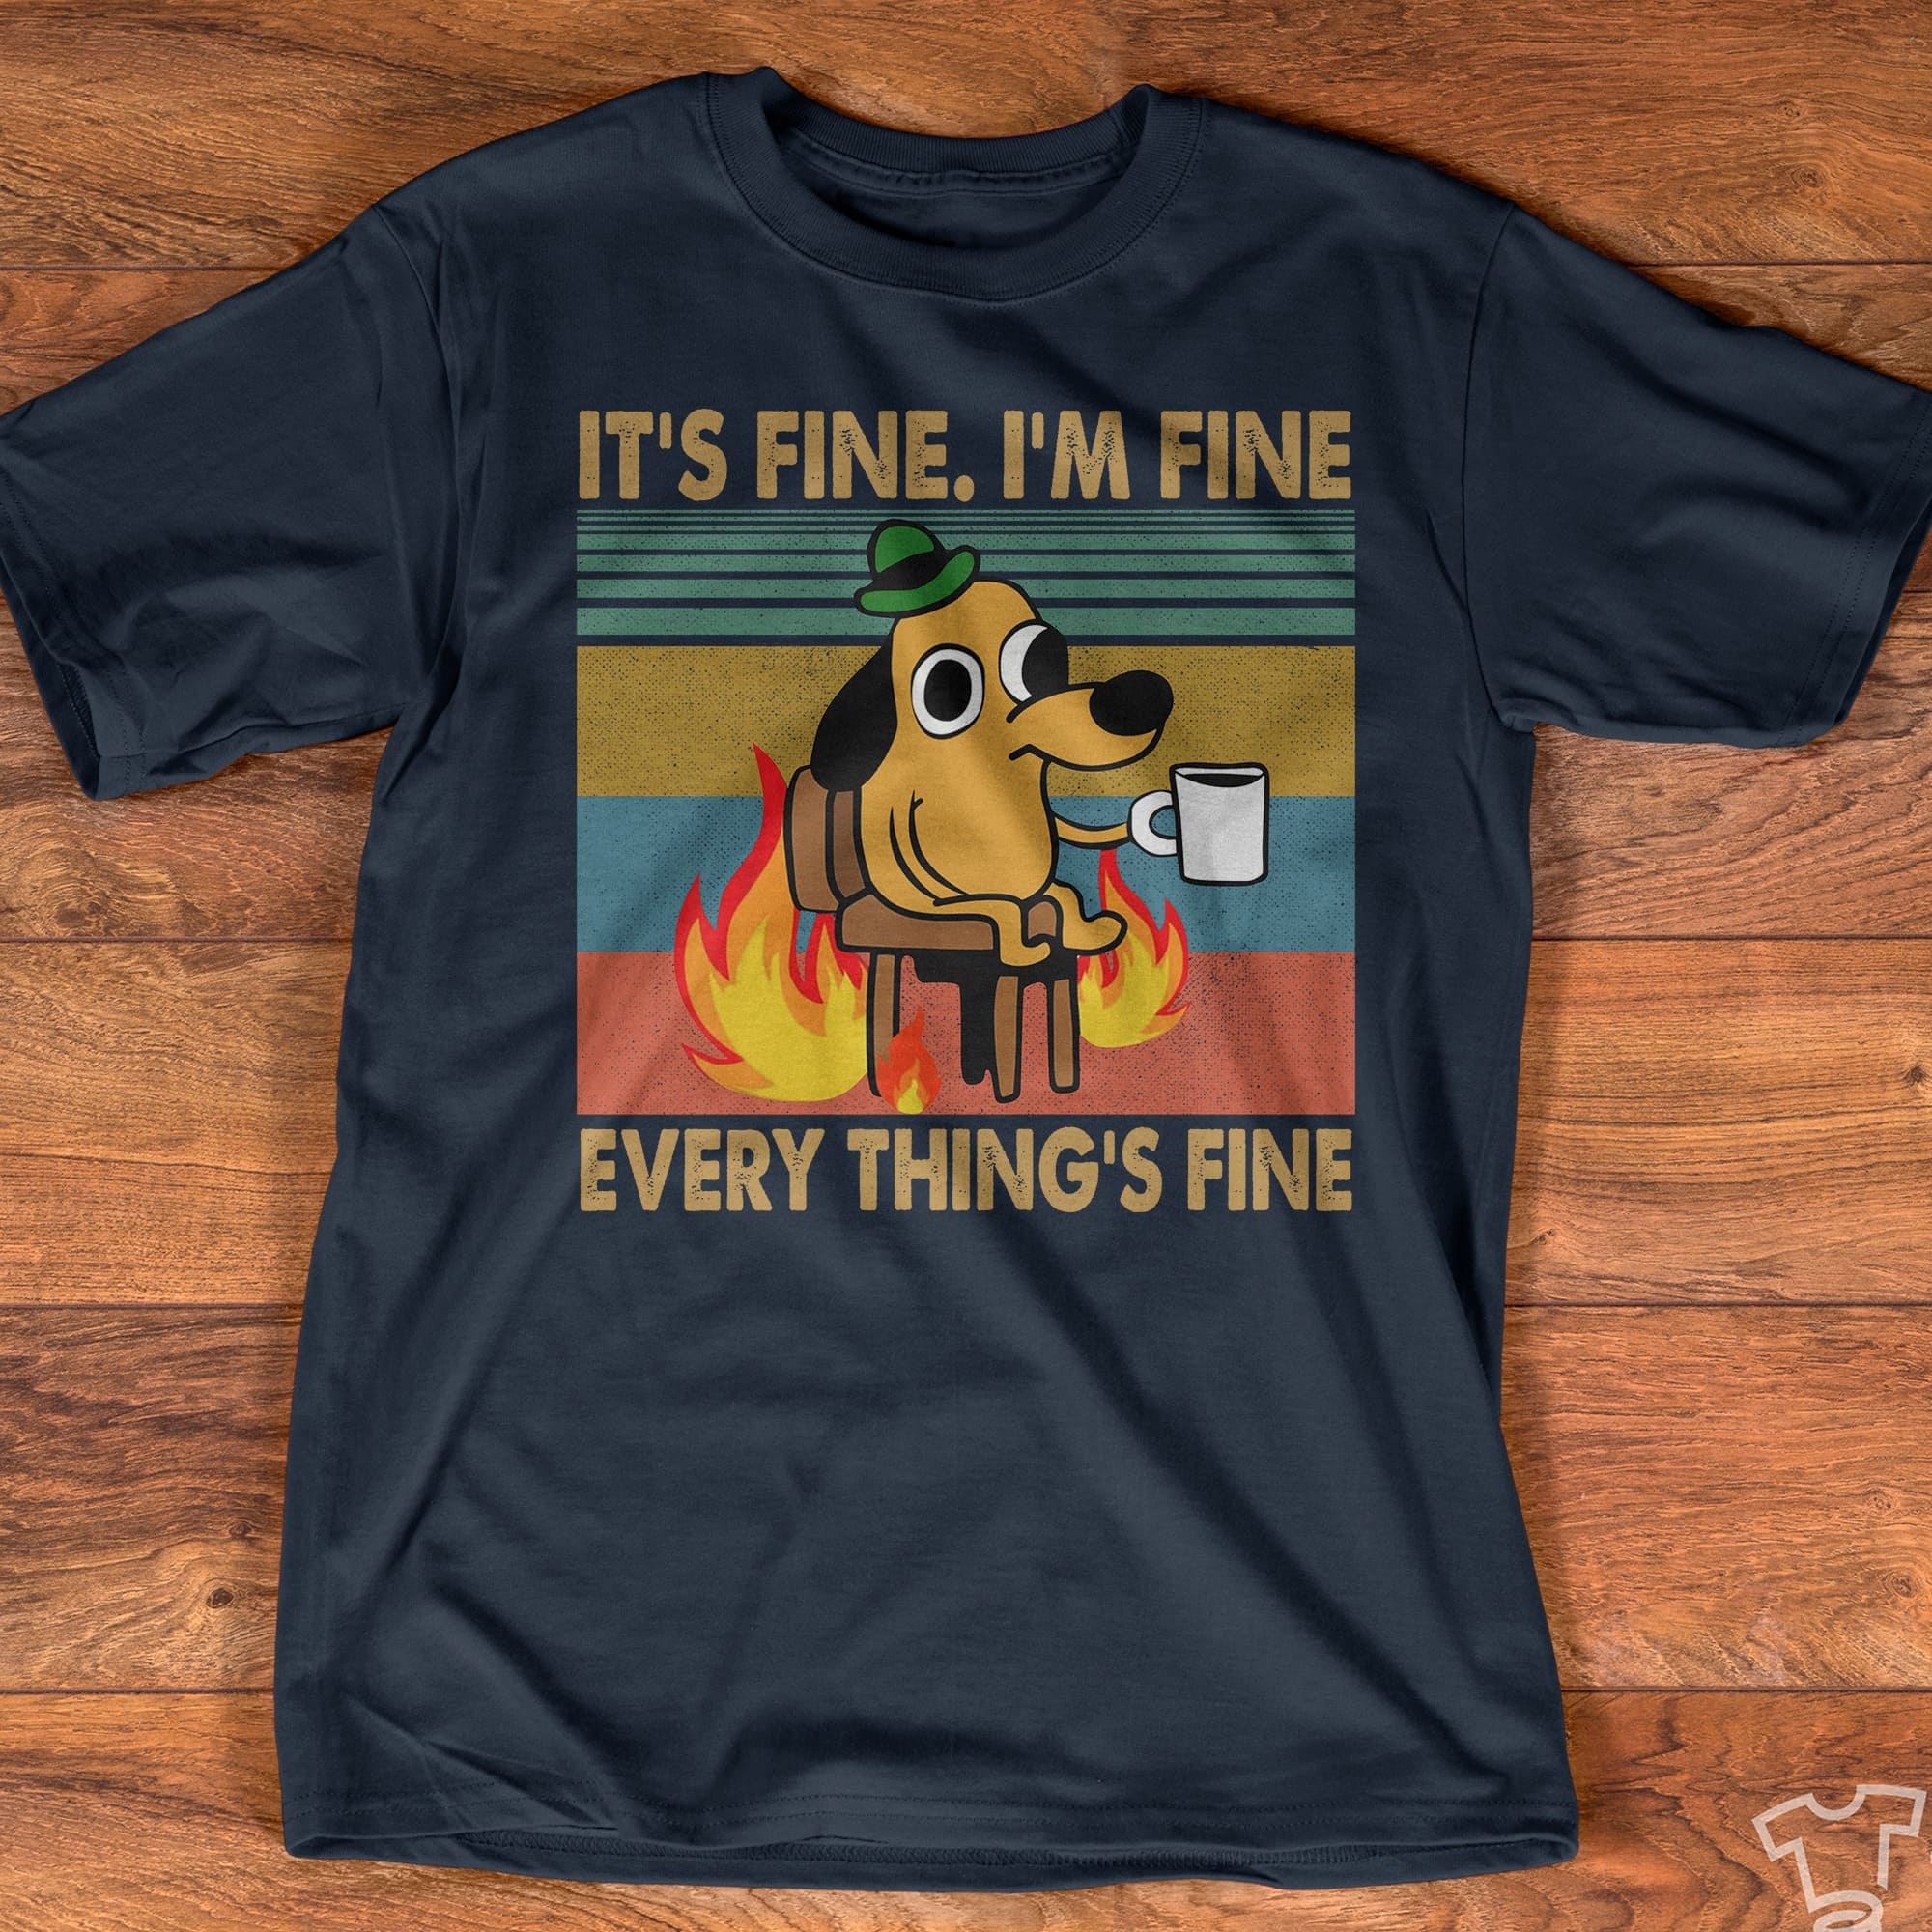 Grumpy Dog Cup Of Coffee - It's fine i'm fine every thing's fine Shirt ...